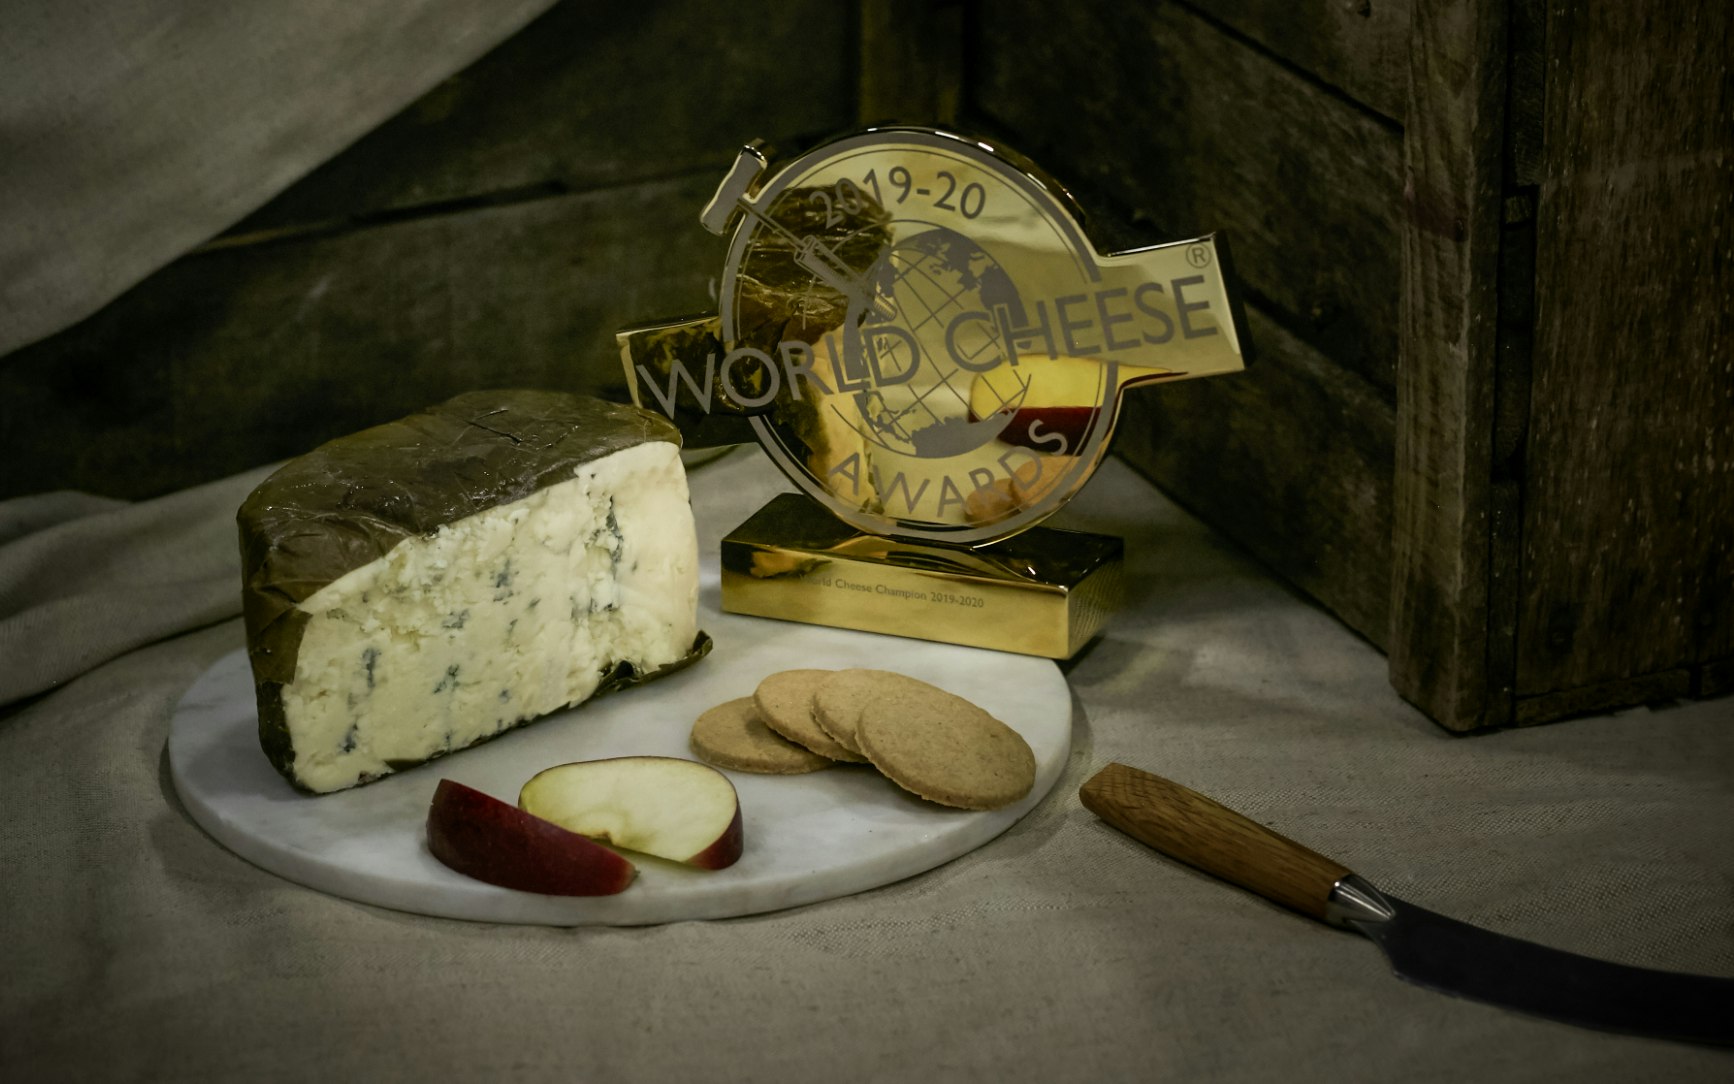 A blue cheese wheel, cut in half, is pictured beside a World Cheese Award